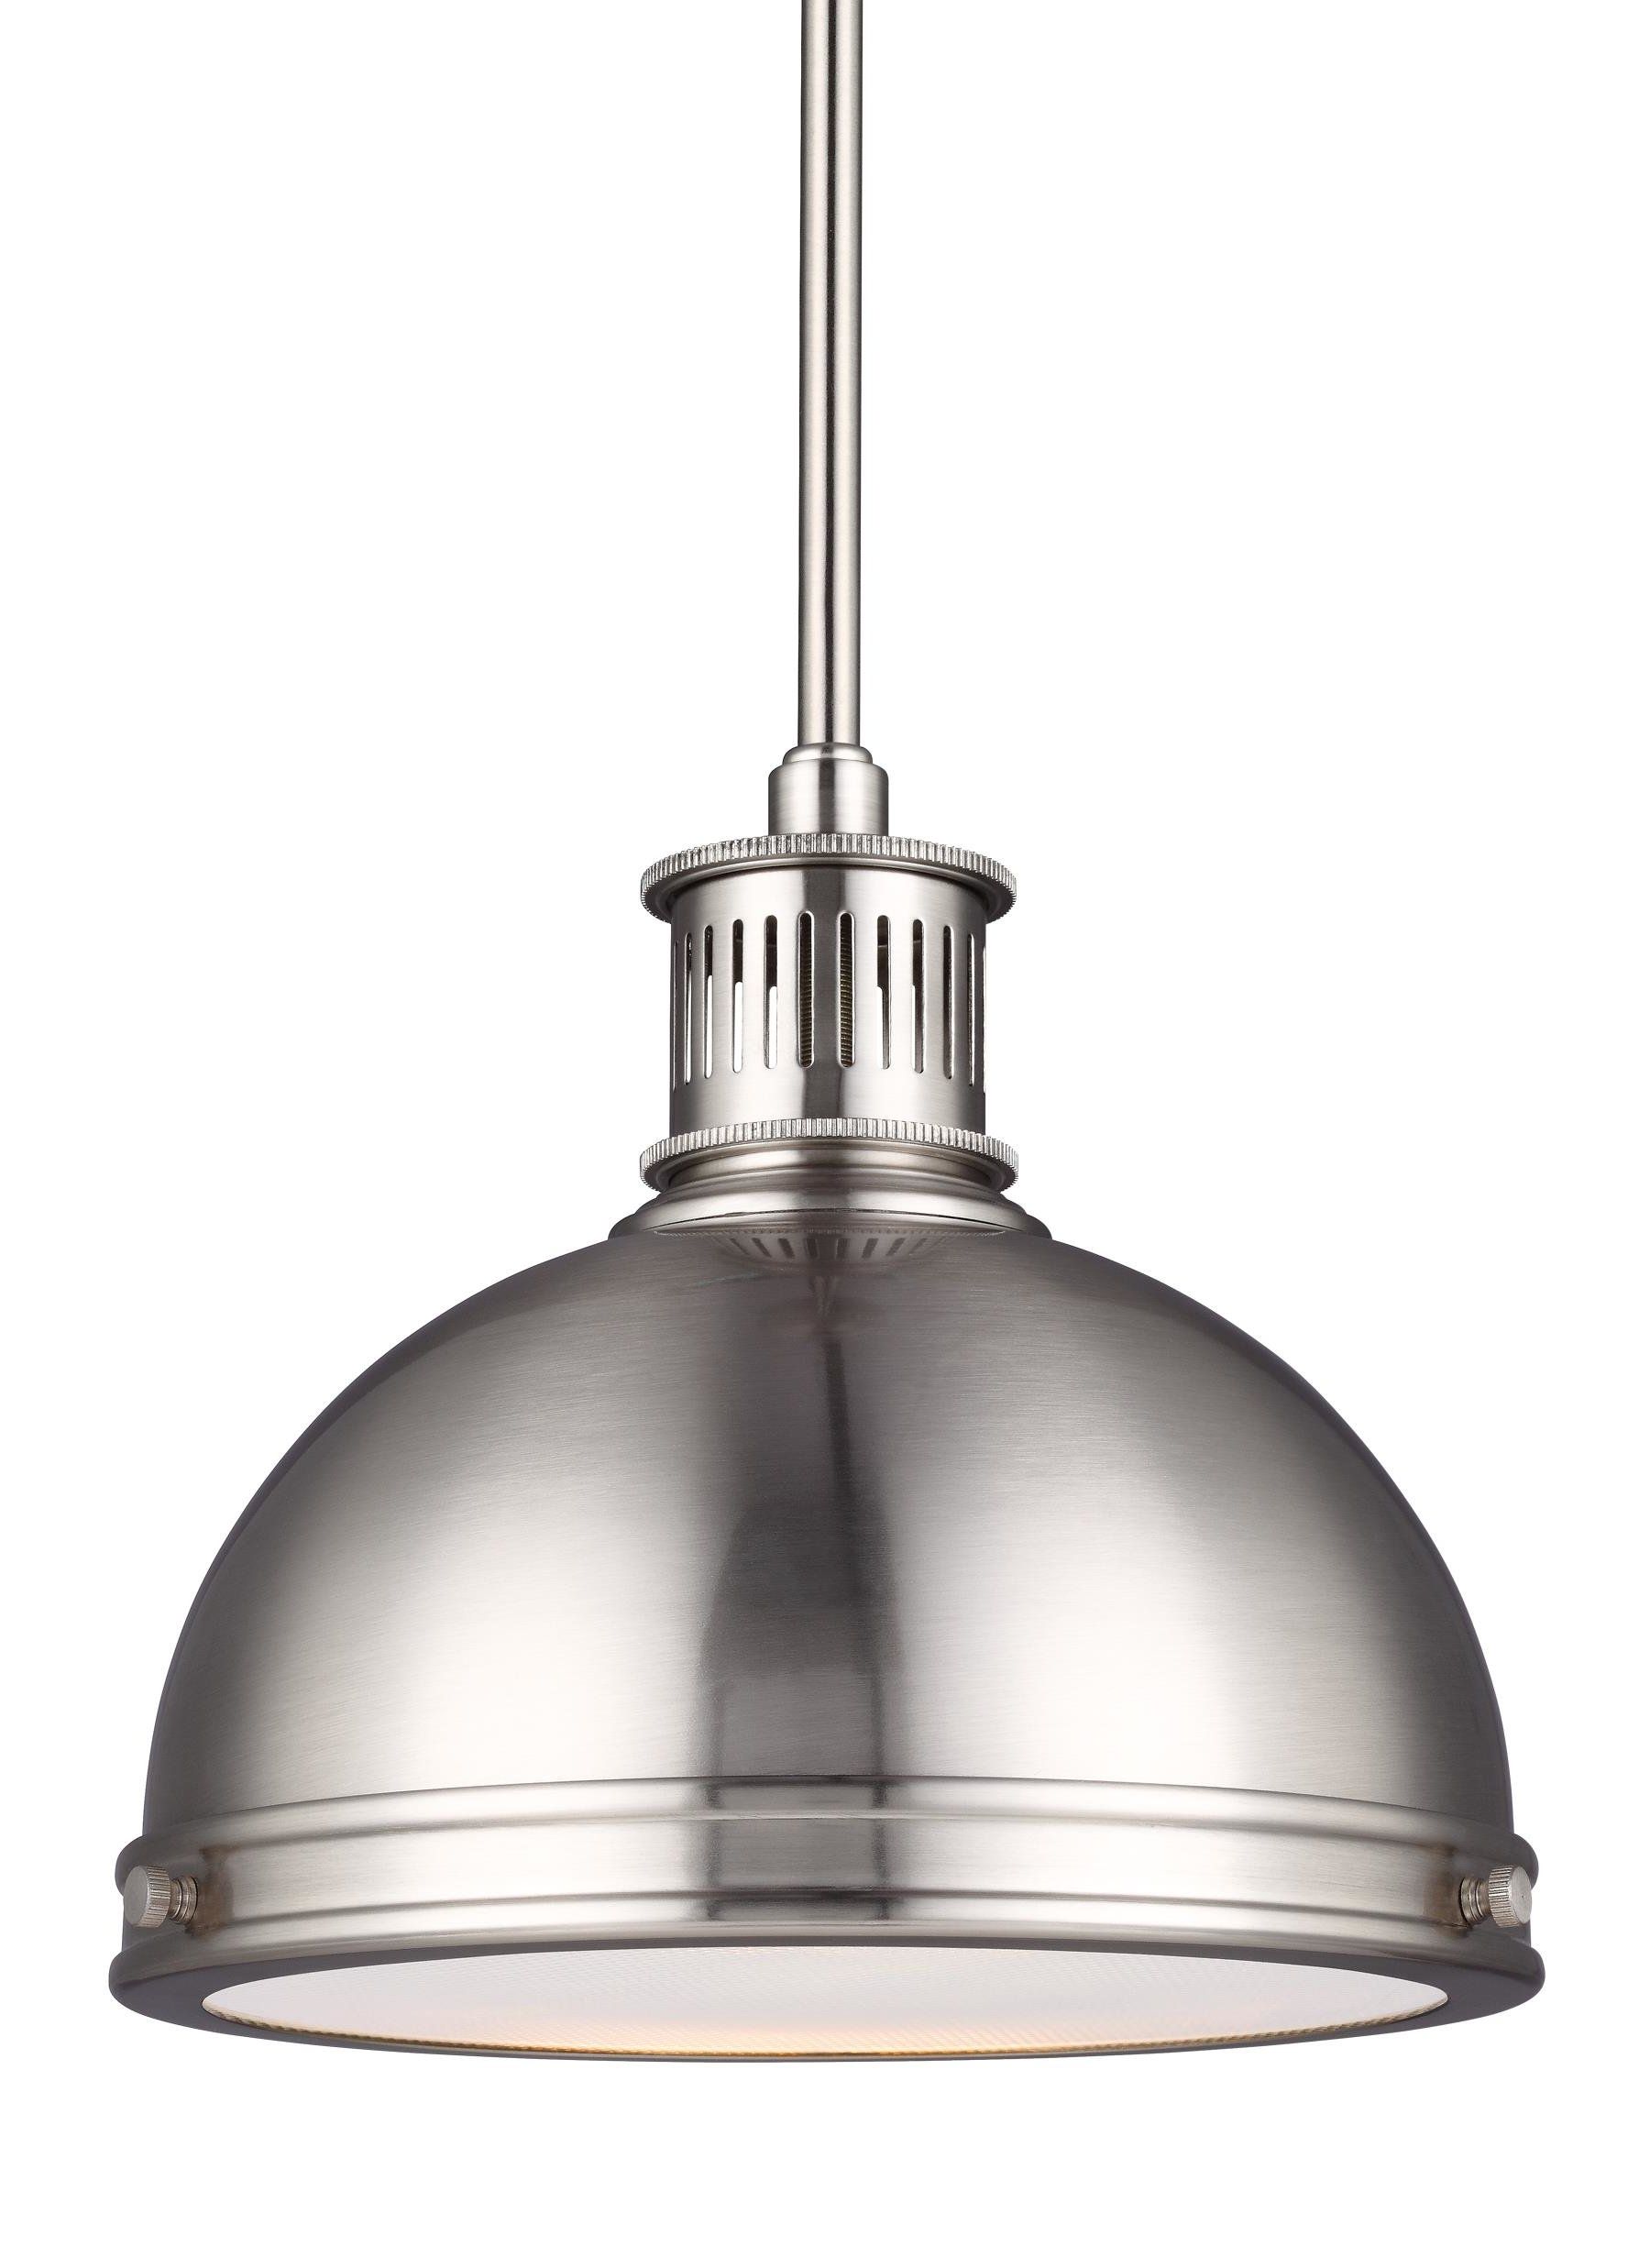 Orchard Hill 1 Light Led Dome Pendant In Most Recently Released Amara 3 Light Dome Pendants (View 11 of 25)